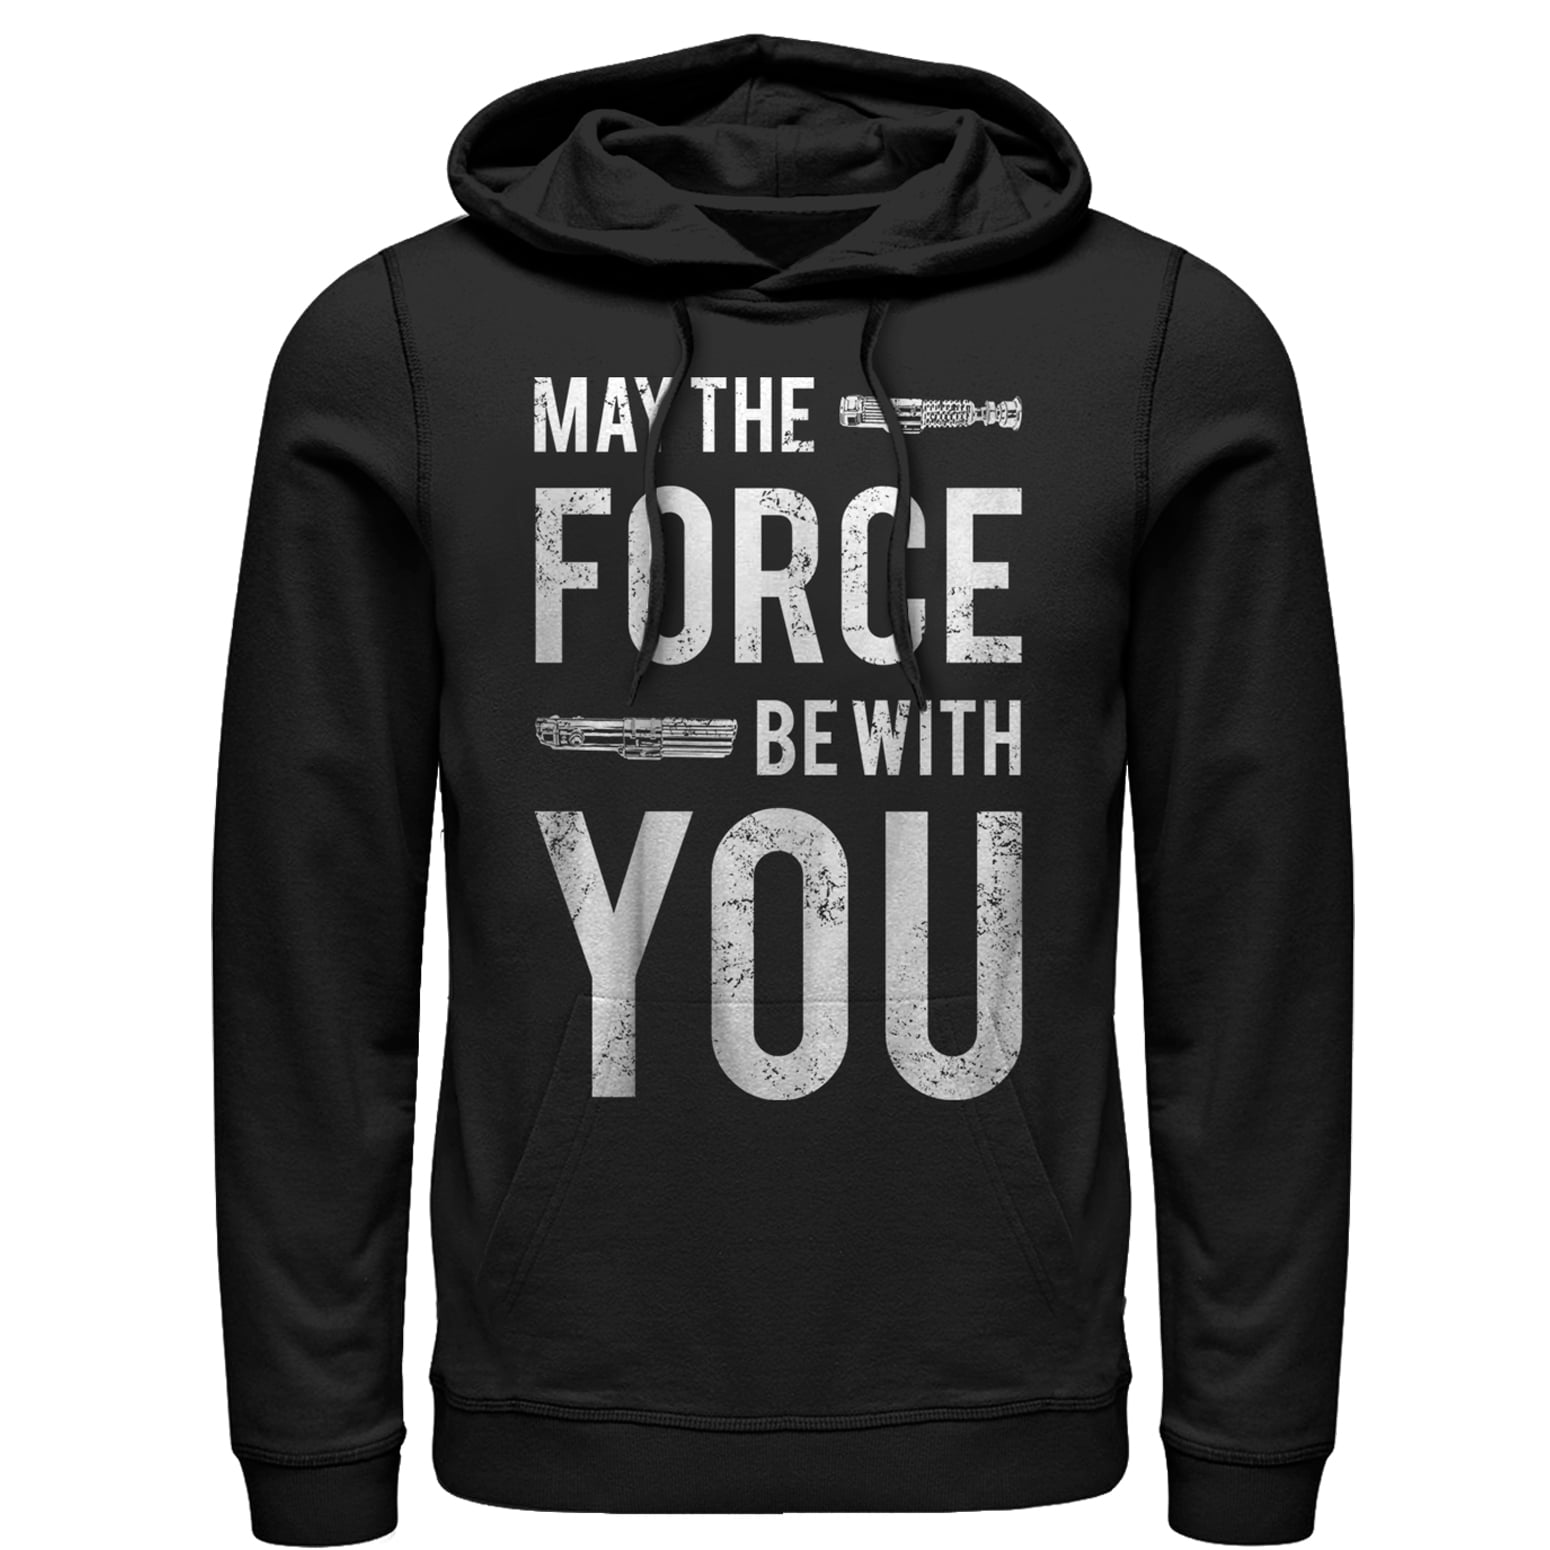 Unisex Star Wars Sweatshirt White or Grey  Jumper  May The Force Be With You  Star Wars Merch Active